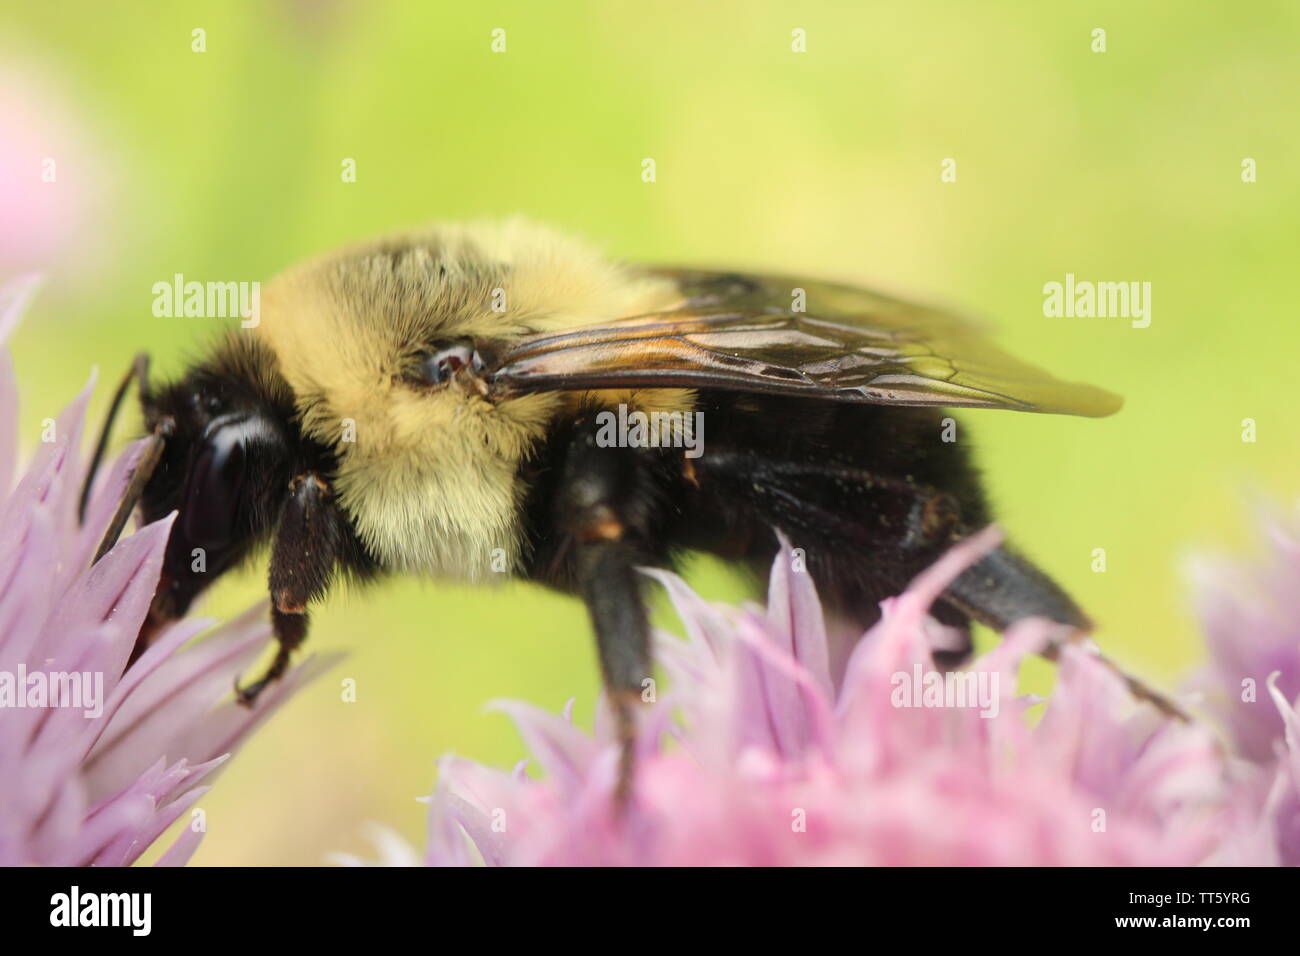 Macro photograph of a Common Eastern Bumble Bee foraging on the flowers of a chive plant. Stock Photo